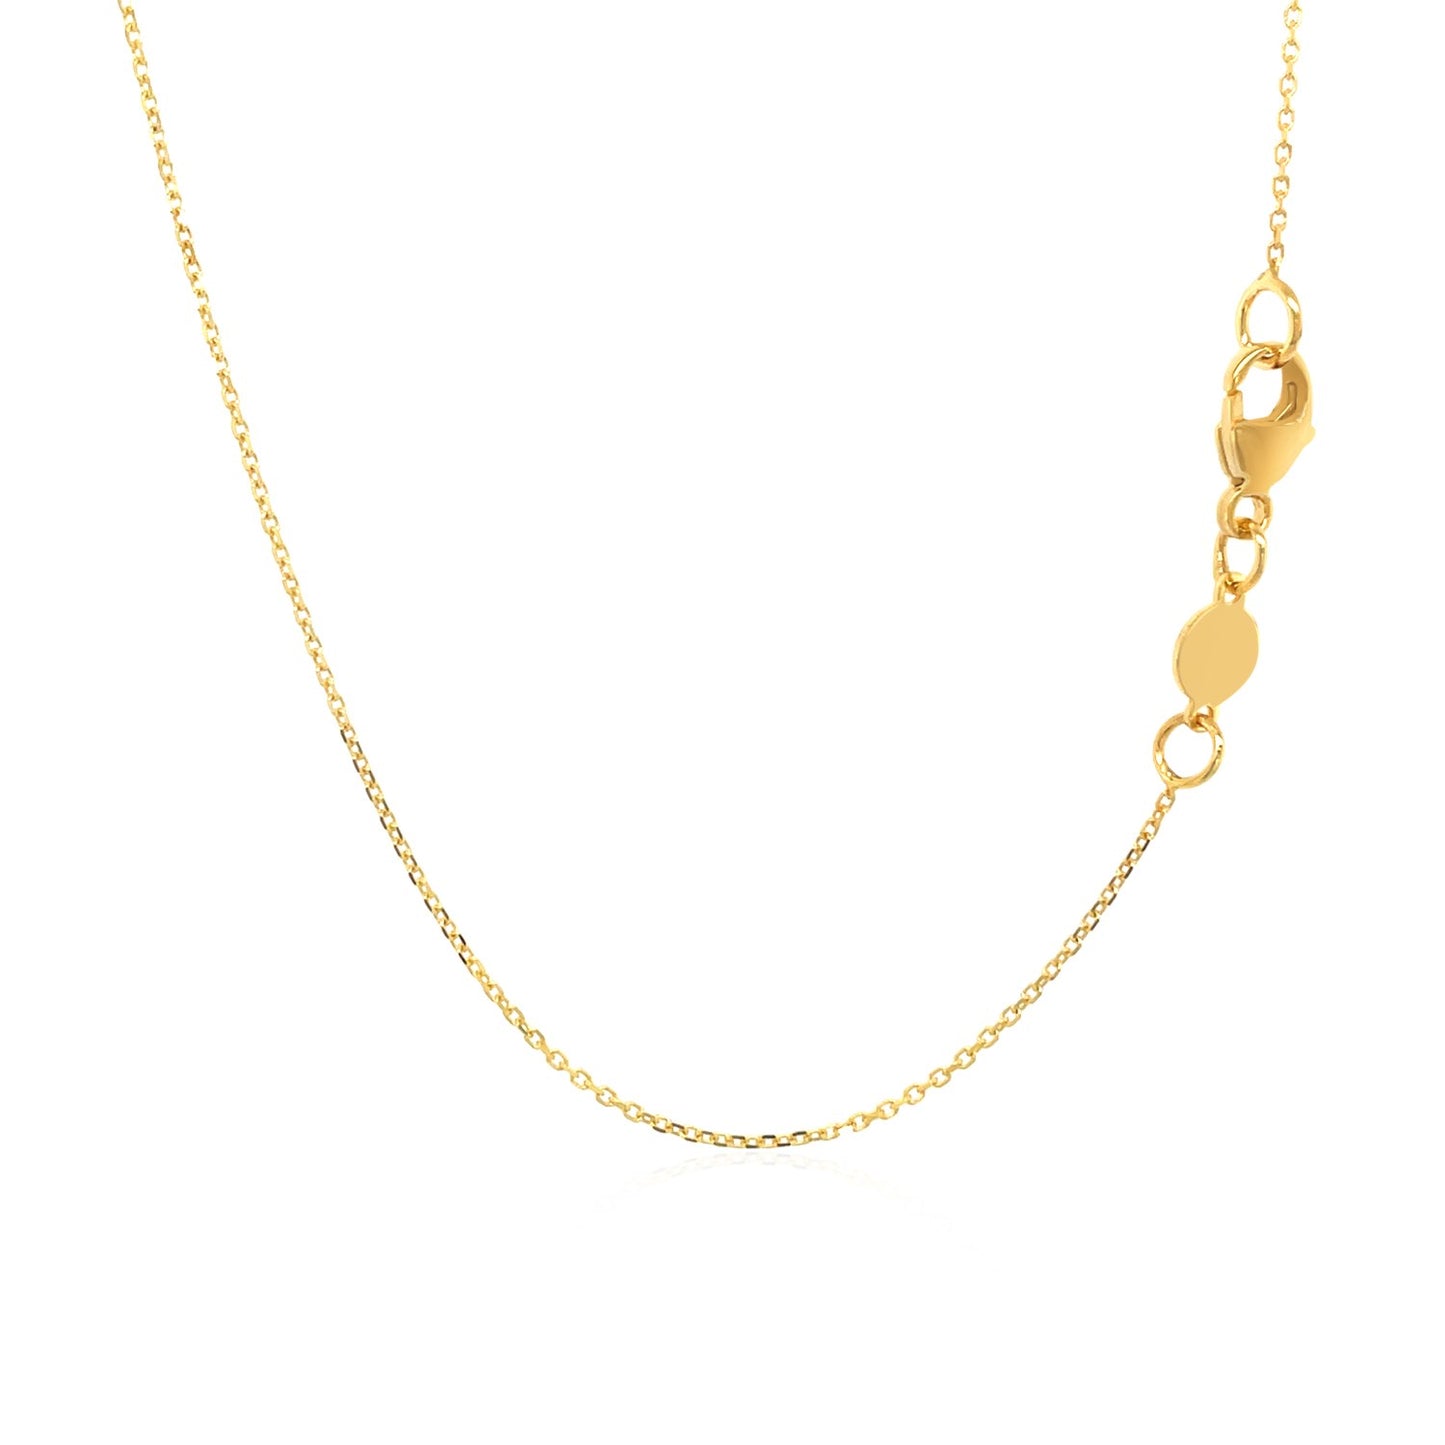 14k Yellow Gold Script LOVE Necklace